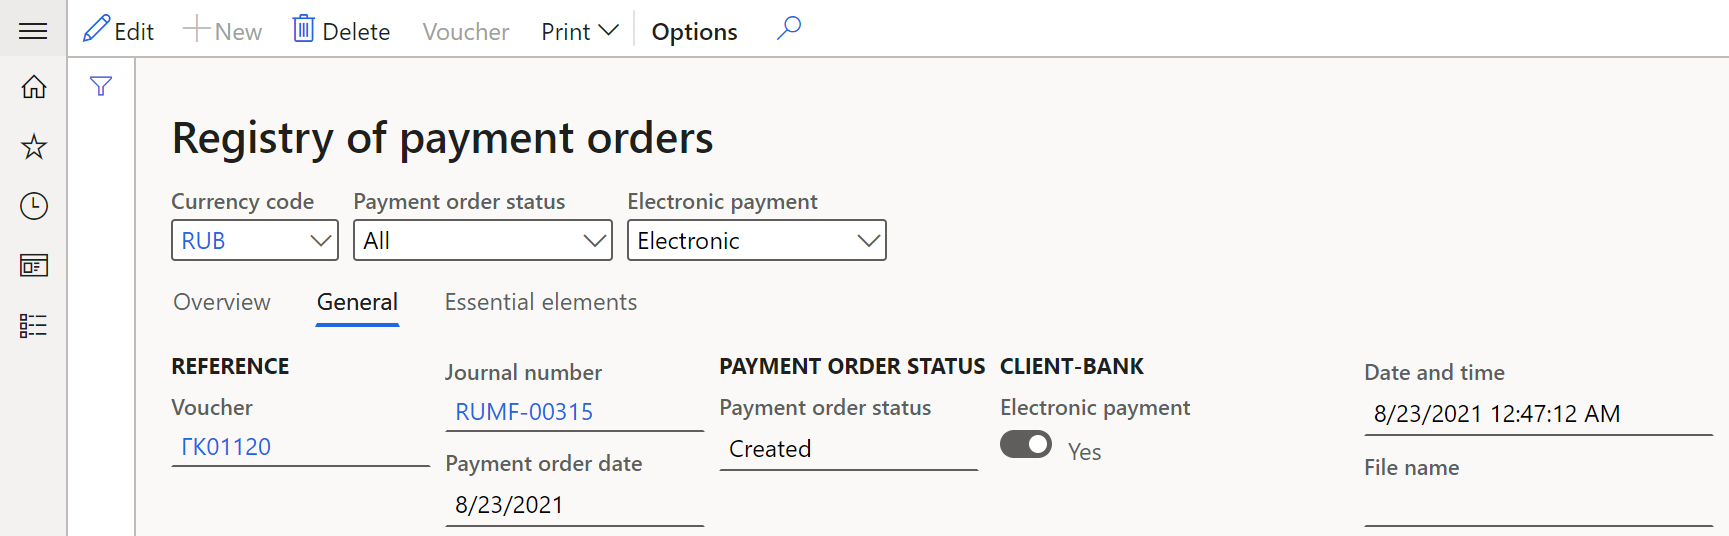 Fields on the General tab of the Registry of payment orders page.